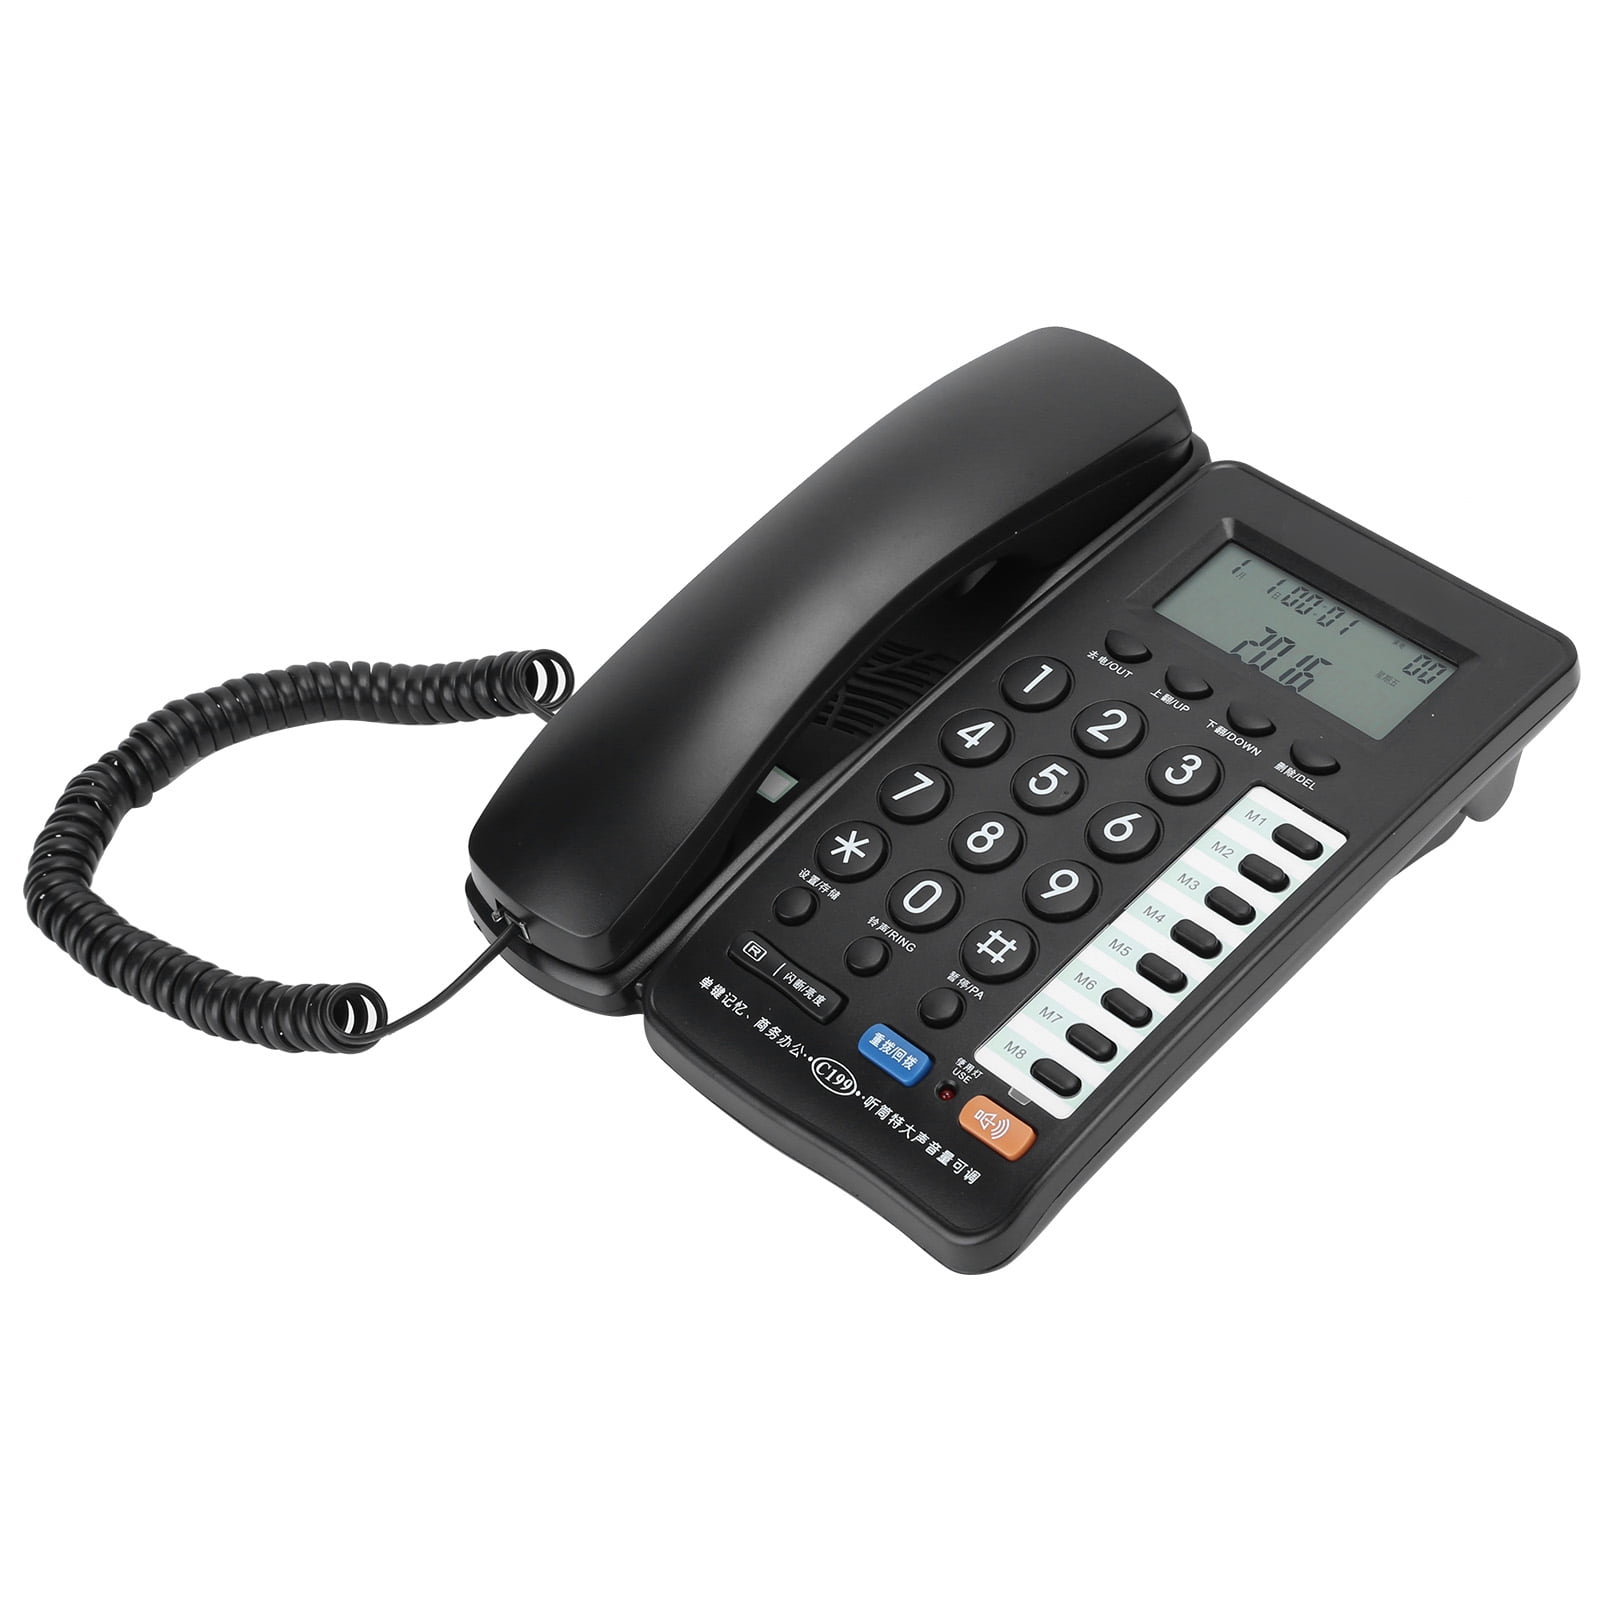 Fully Refurbished AT&T 974 4-Line Phone 89-0413-00 